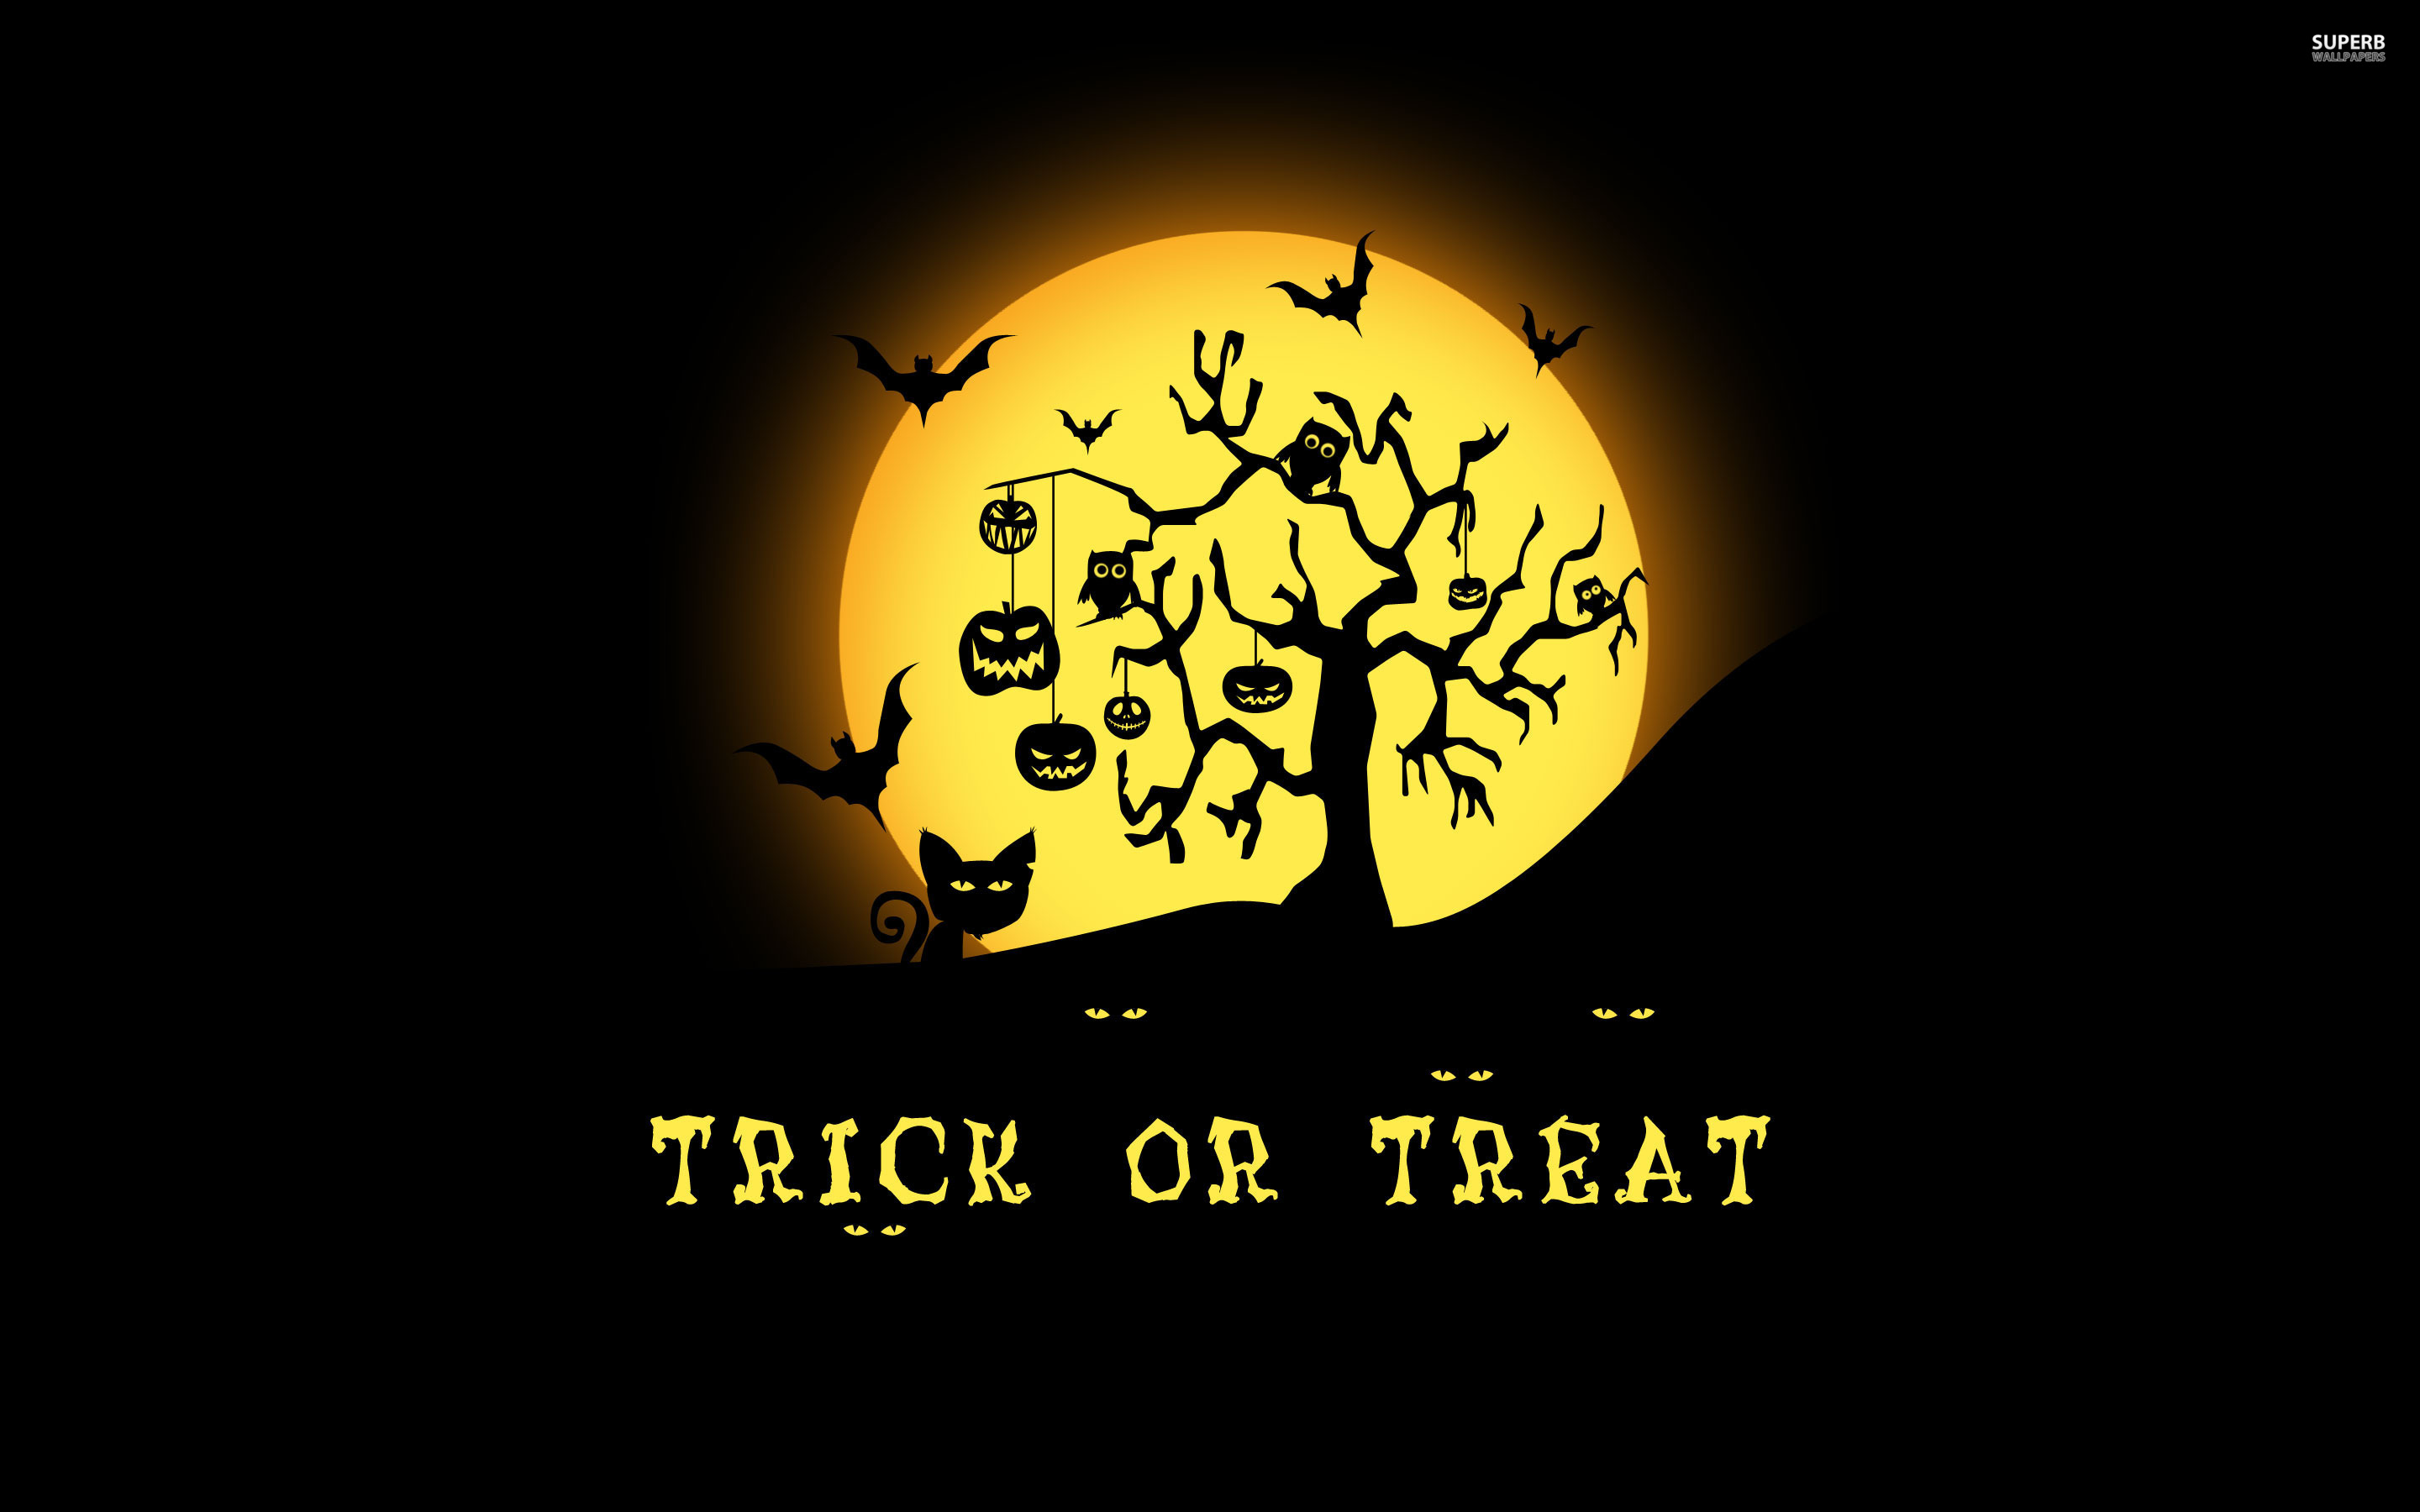 Trick or treat : Desktop and mobile wallpaper : Wallippo